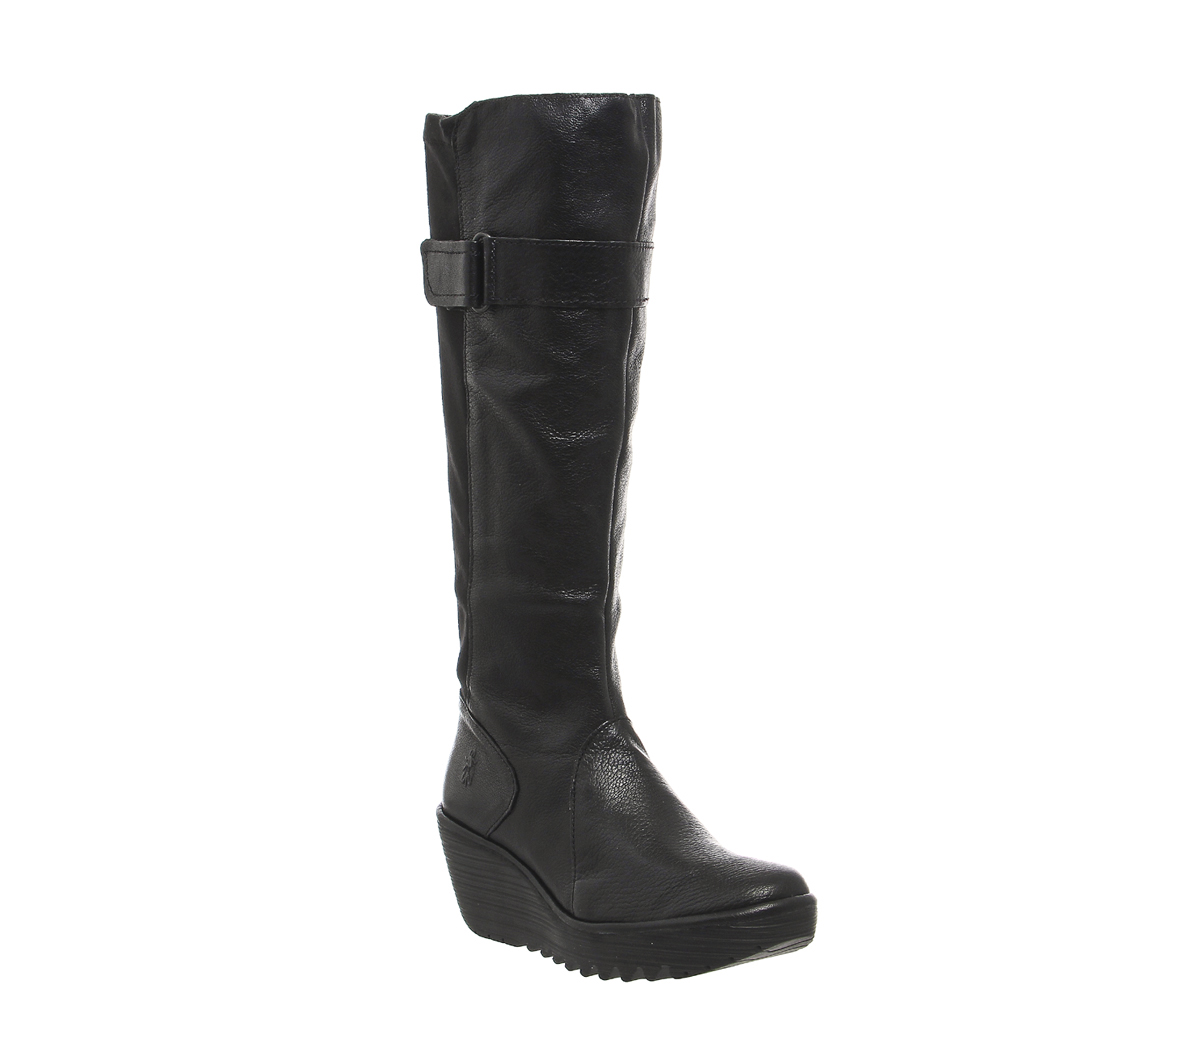 Fly London Yash Wedge Knee Boots Black Leather - Knee High Boots